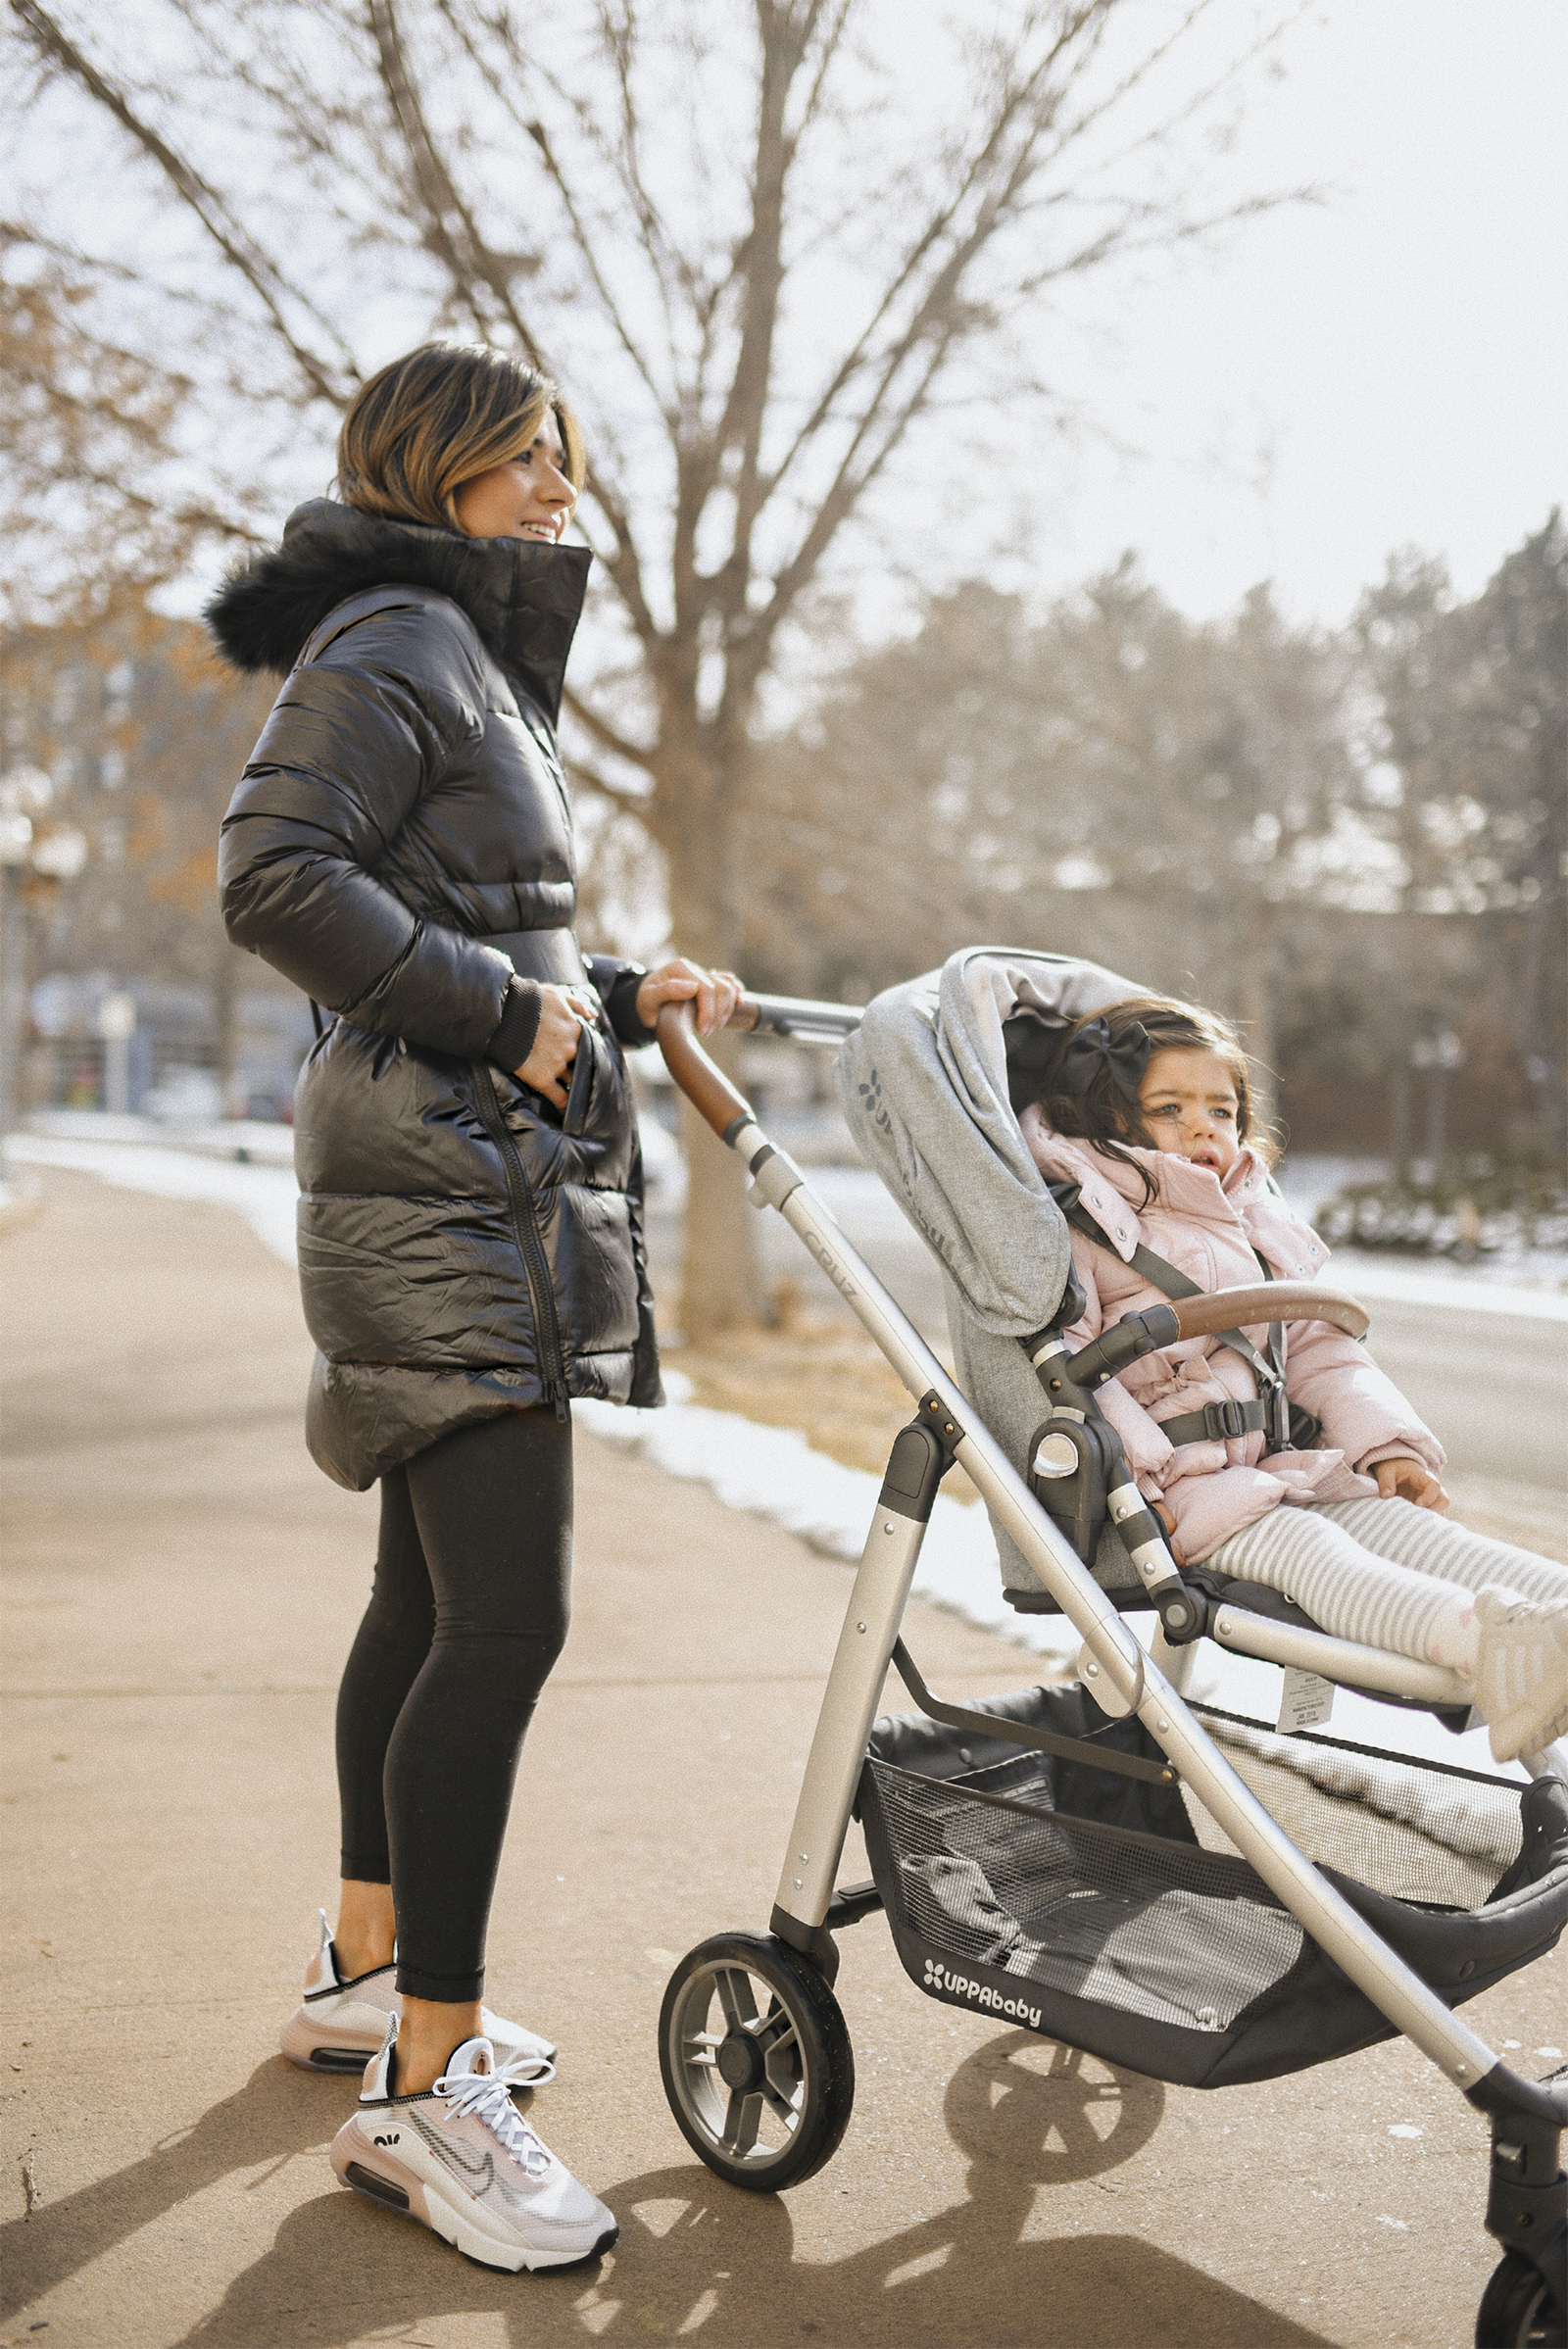 Carolina Hellal of Chic Talk wearing a The North Face back parka, Lulumeno black leggins, Nike Air Max 2090. Her daughter is in the Uppa Baby Cruz stroller.